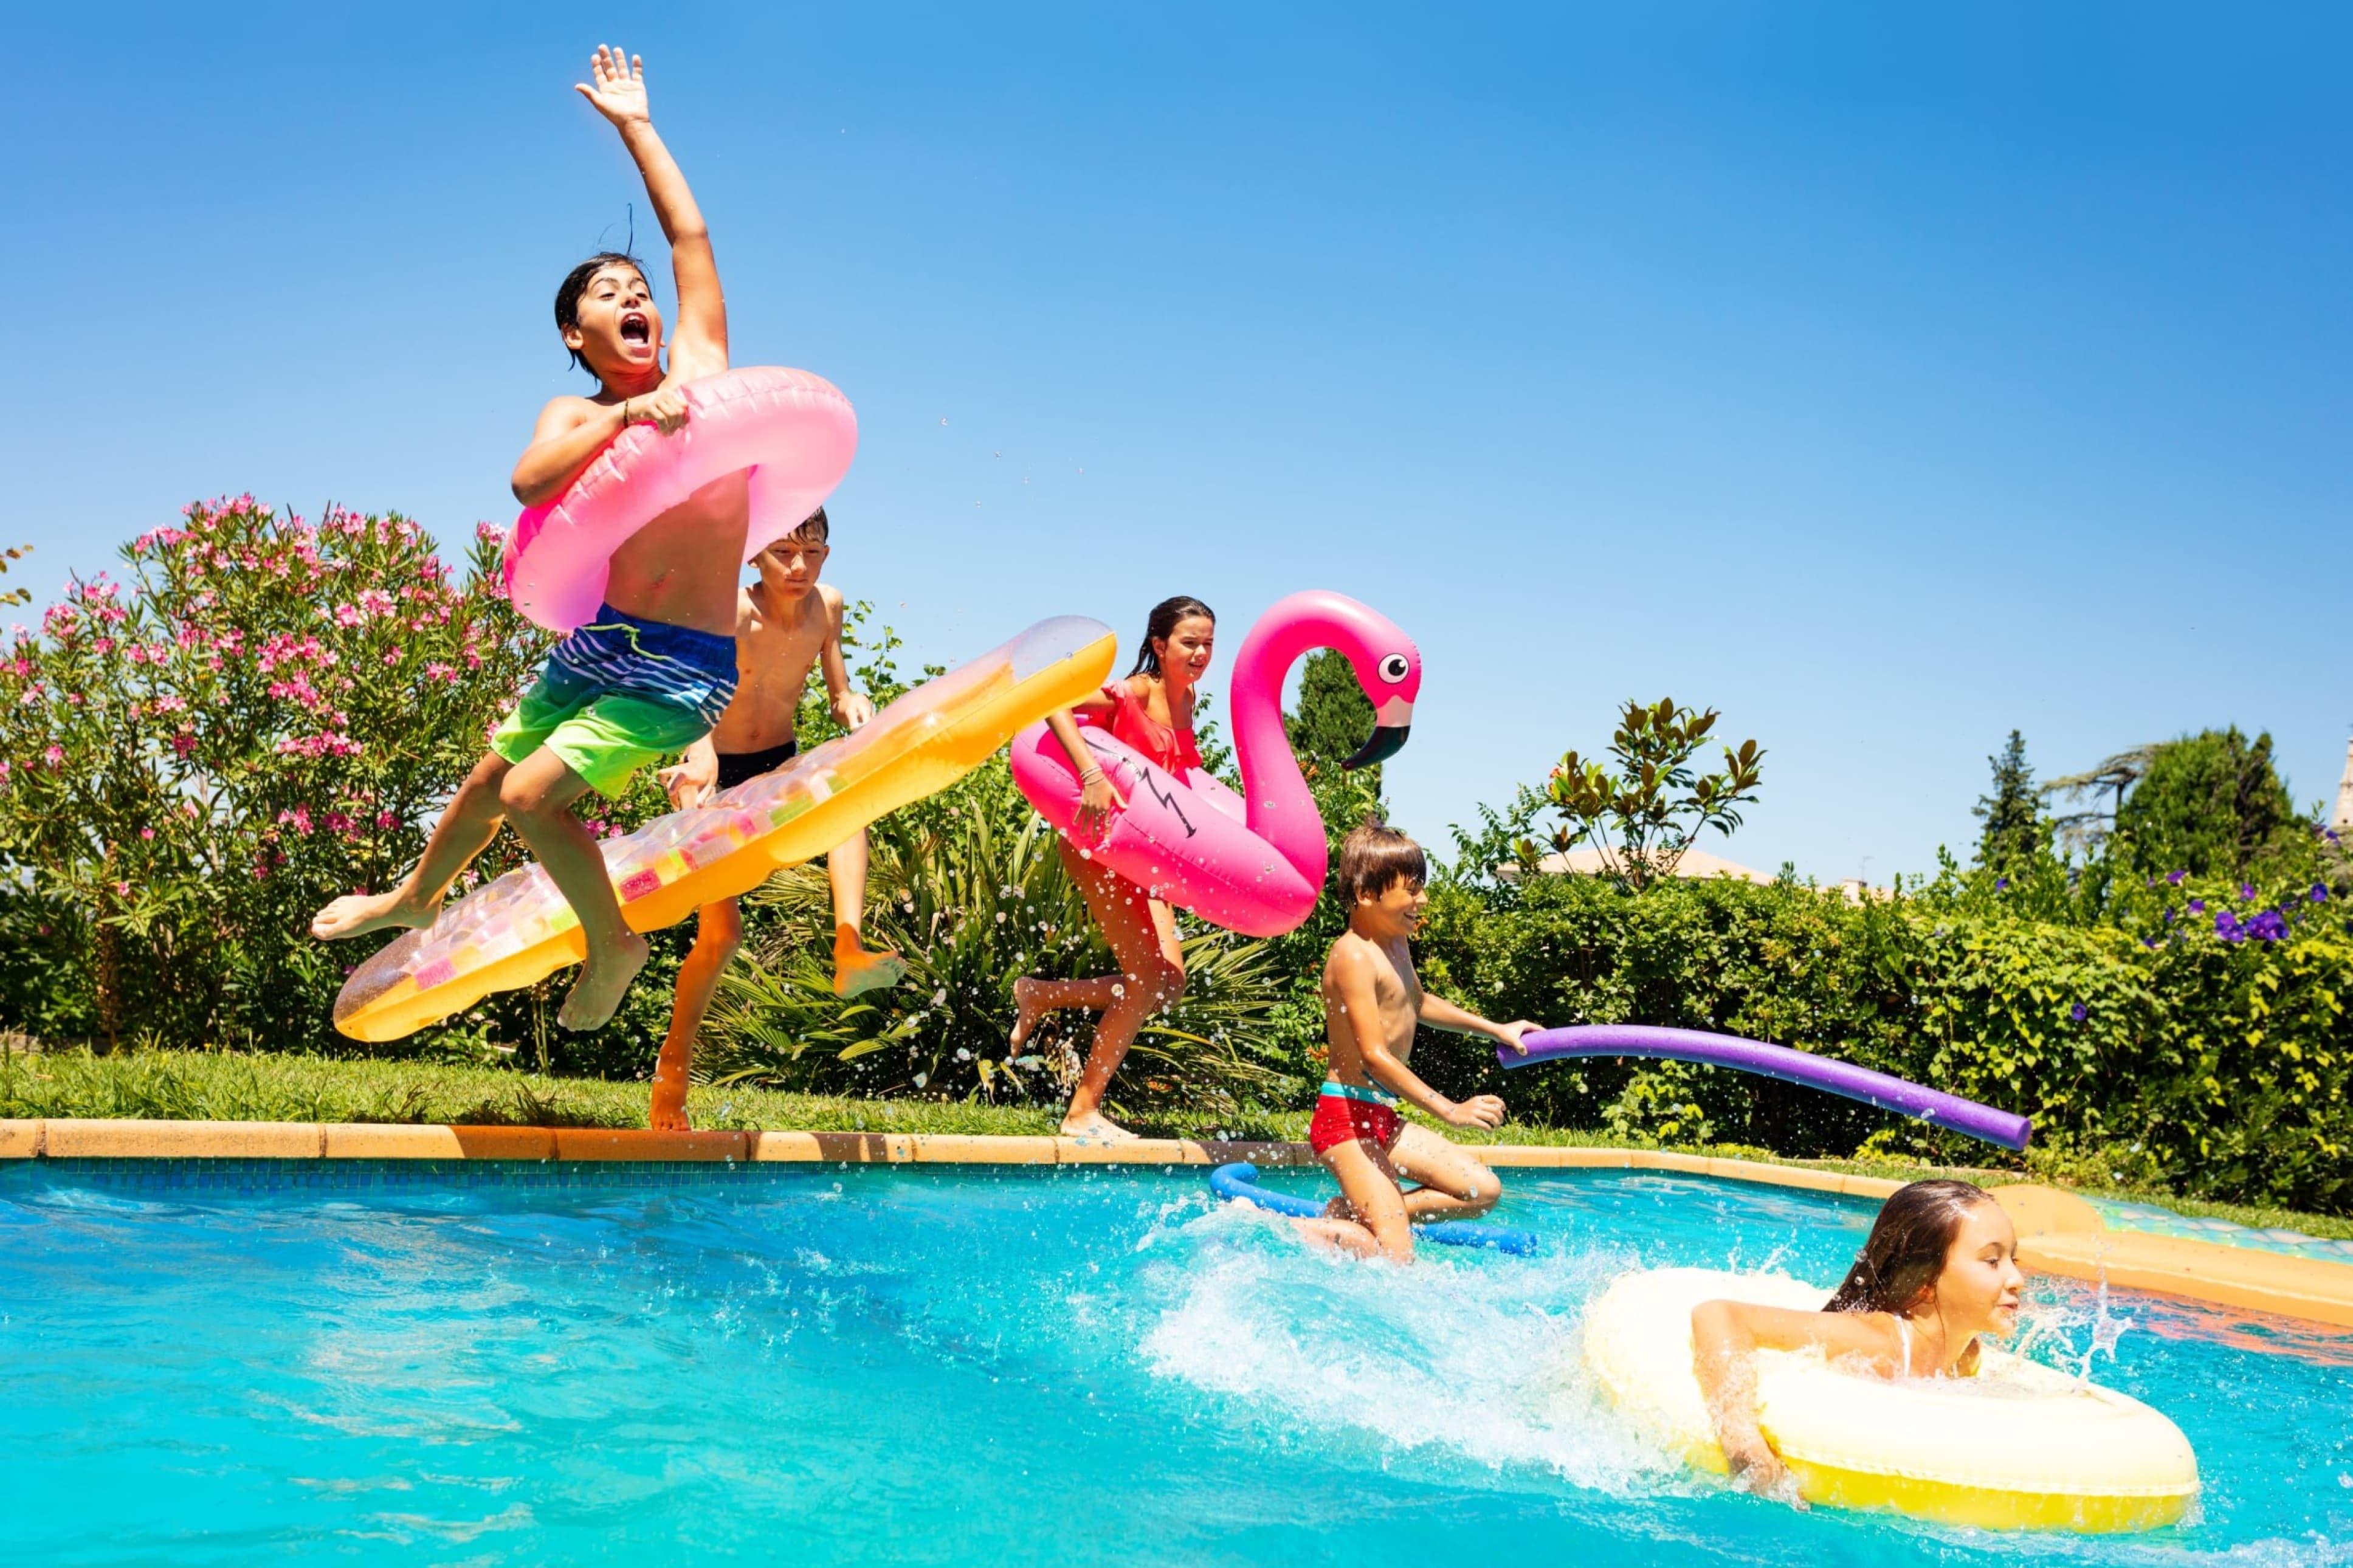 How to Throw a Summer Pool Party for Kids